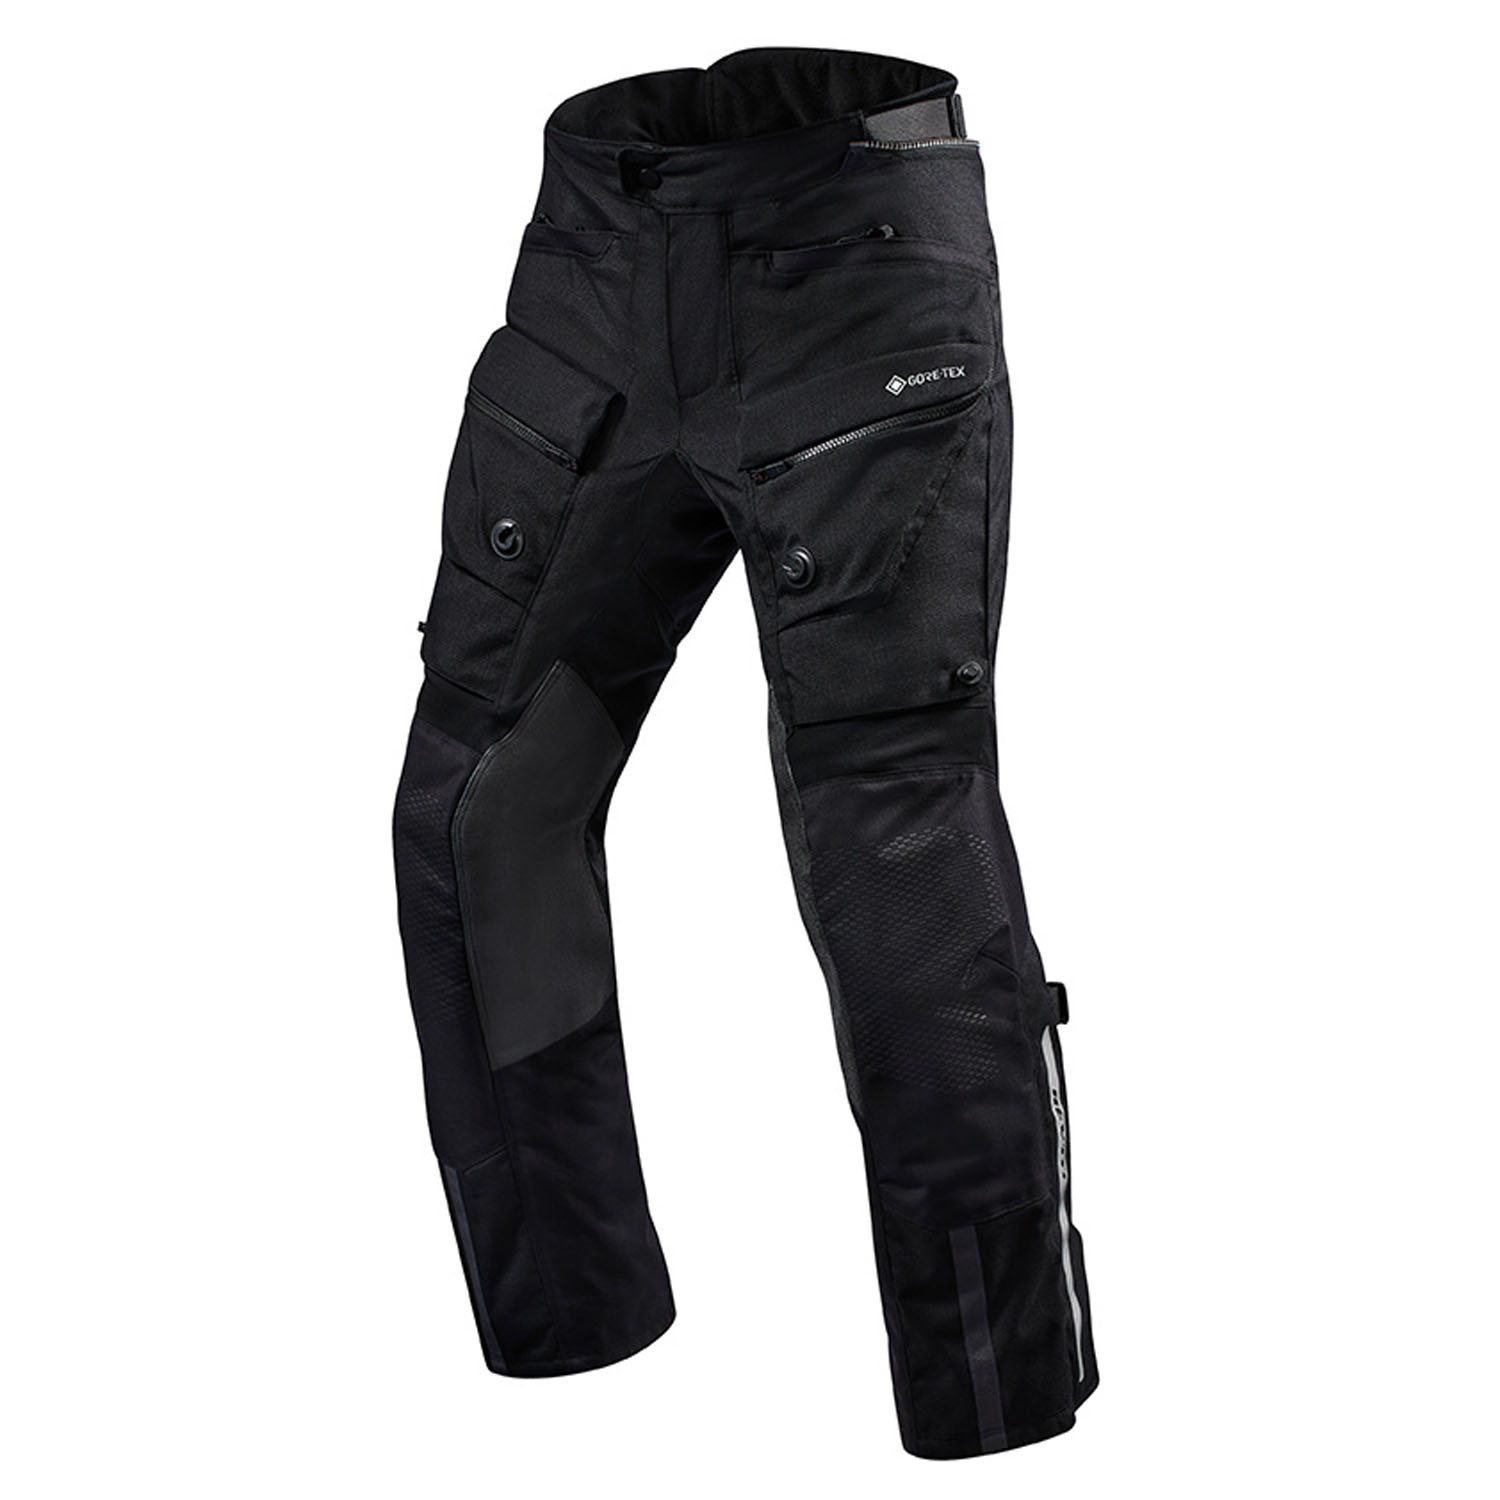 Image of REV'IT! Trousers Defender 3 GTX Black Long Motorcycle Pants Taille XL